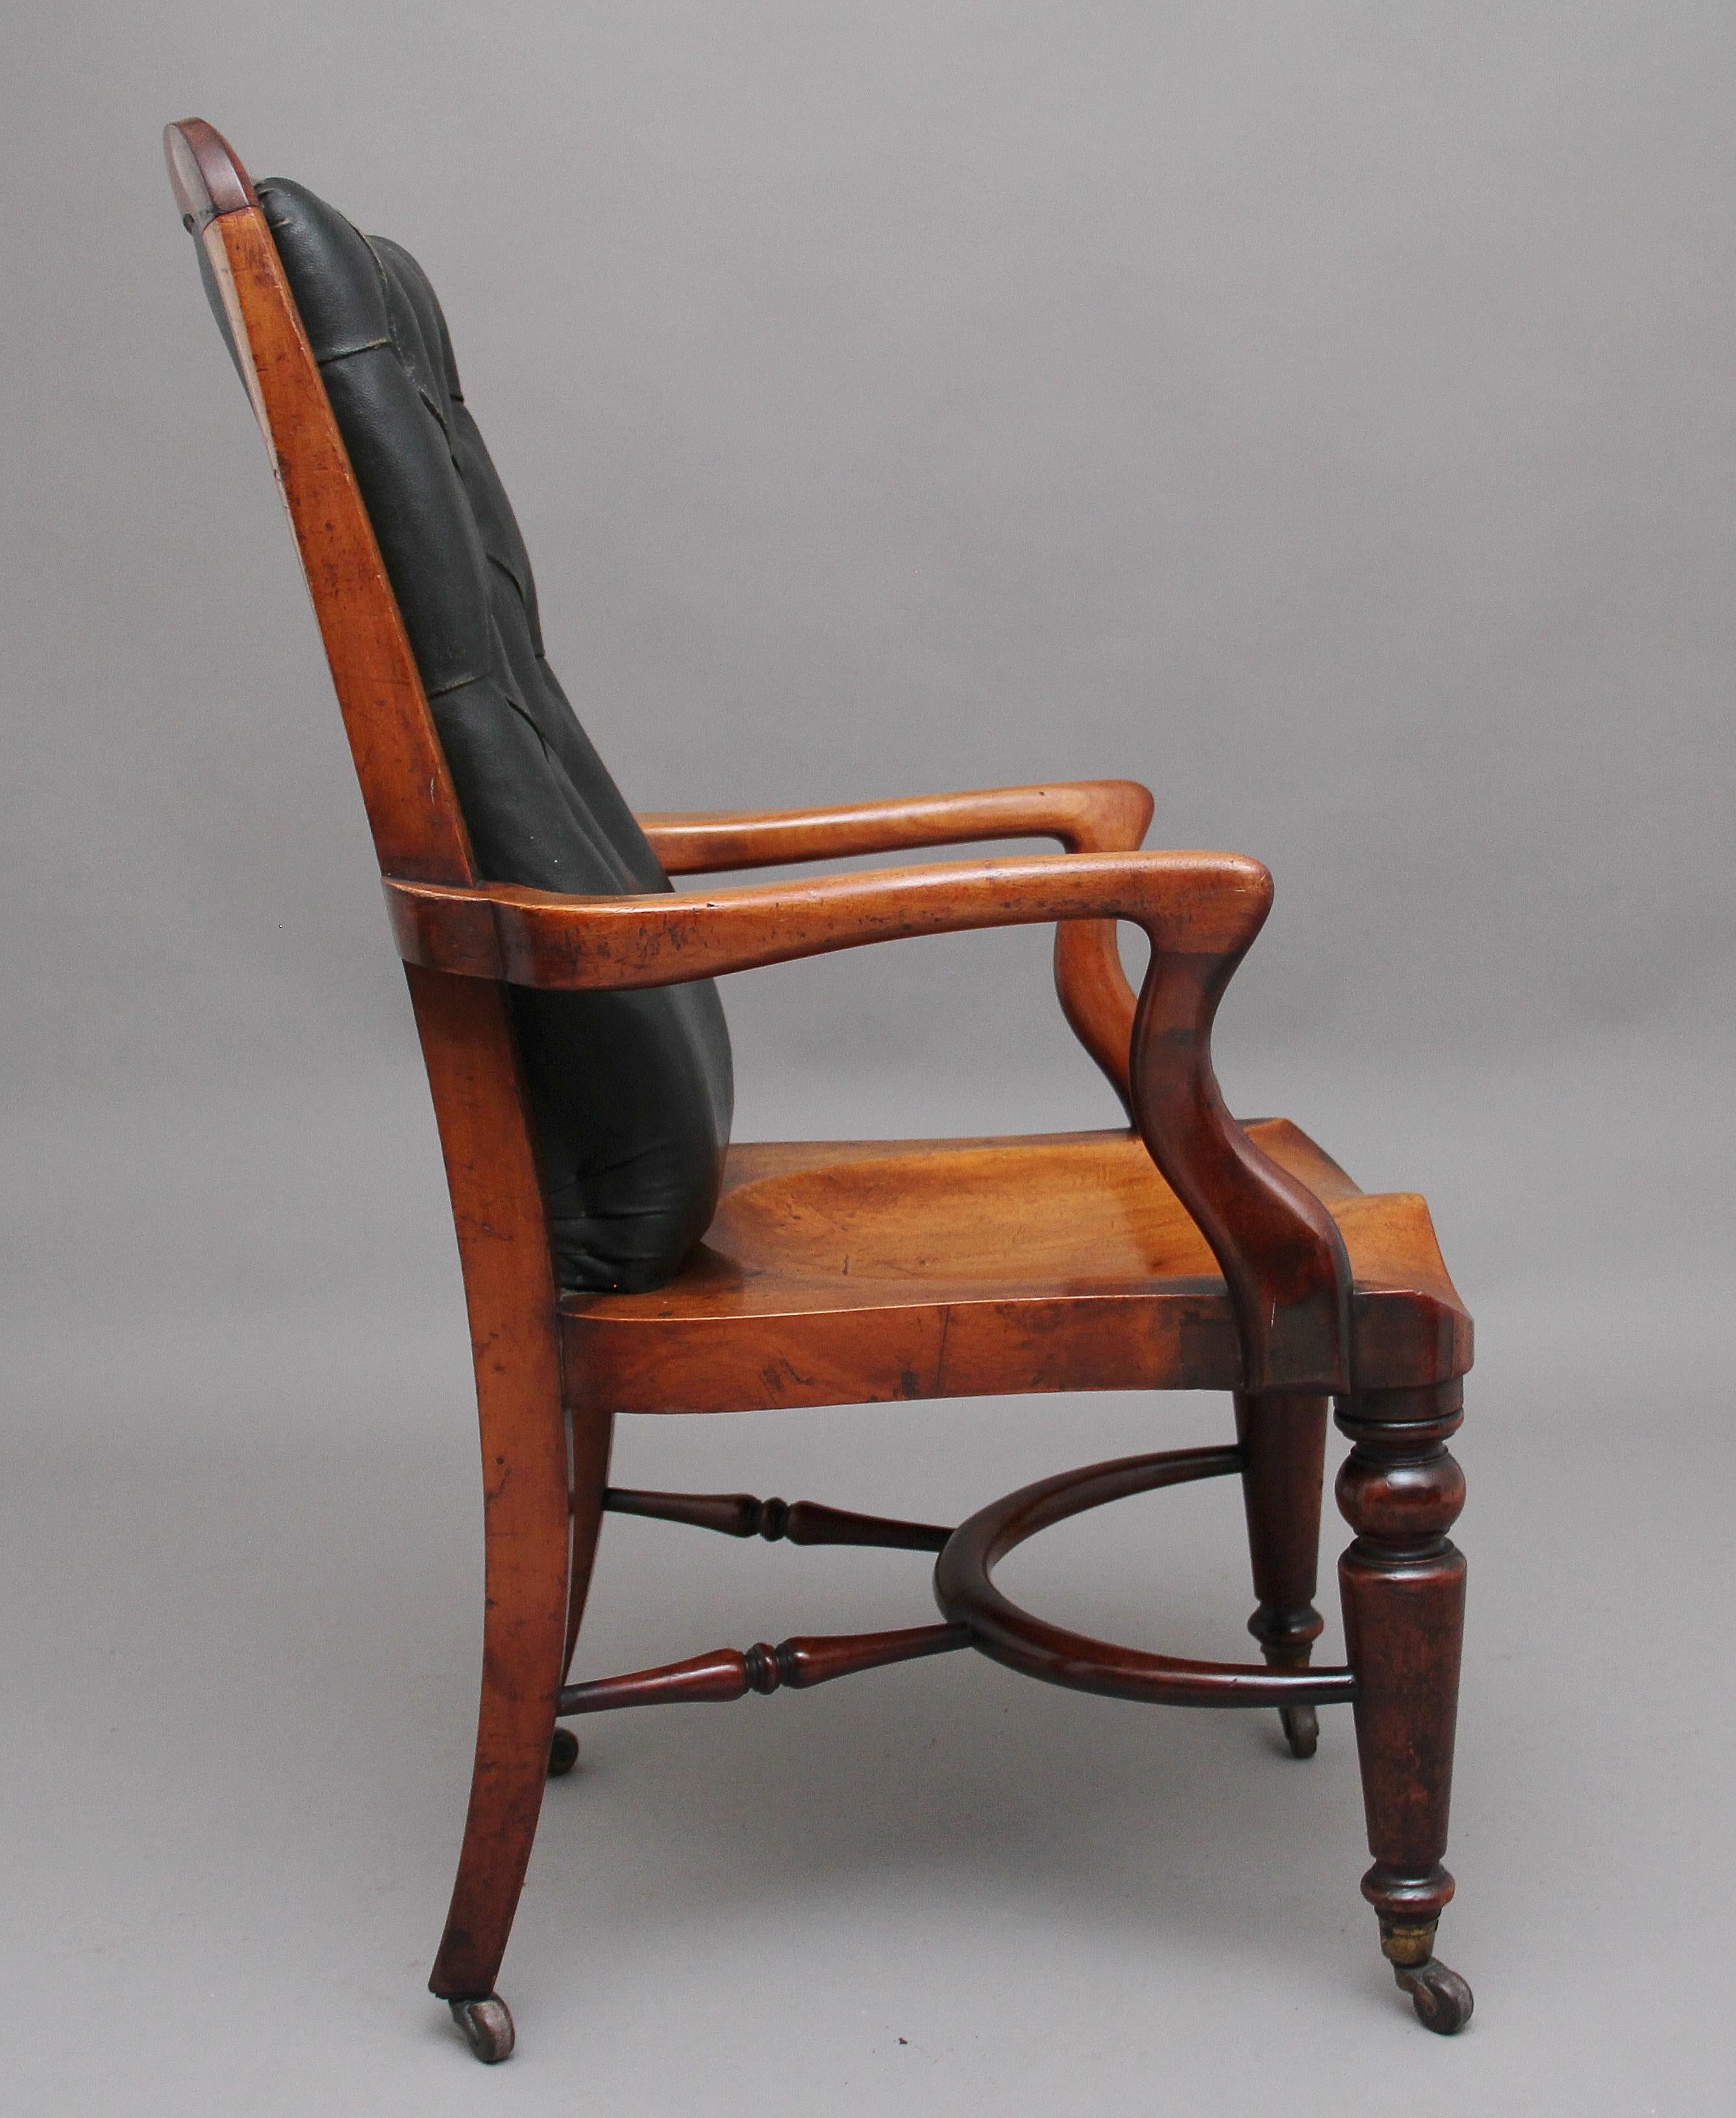 19th century mahogany library / desk chair by Heals of London, having a dark green padded deep buttoned back enclosed in a nice solid mahogany frame, a nice deep saddle seat that is very comfortable to sit at, wonderfully shaped serpentine arms,